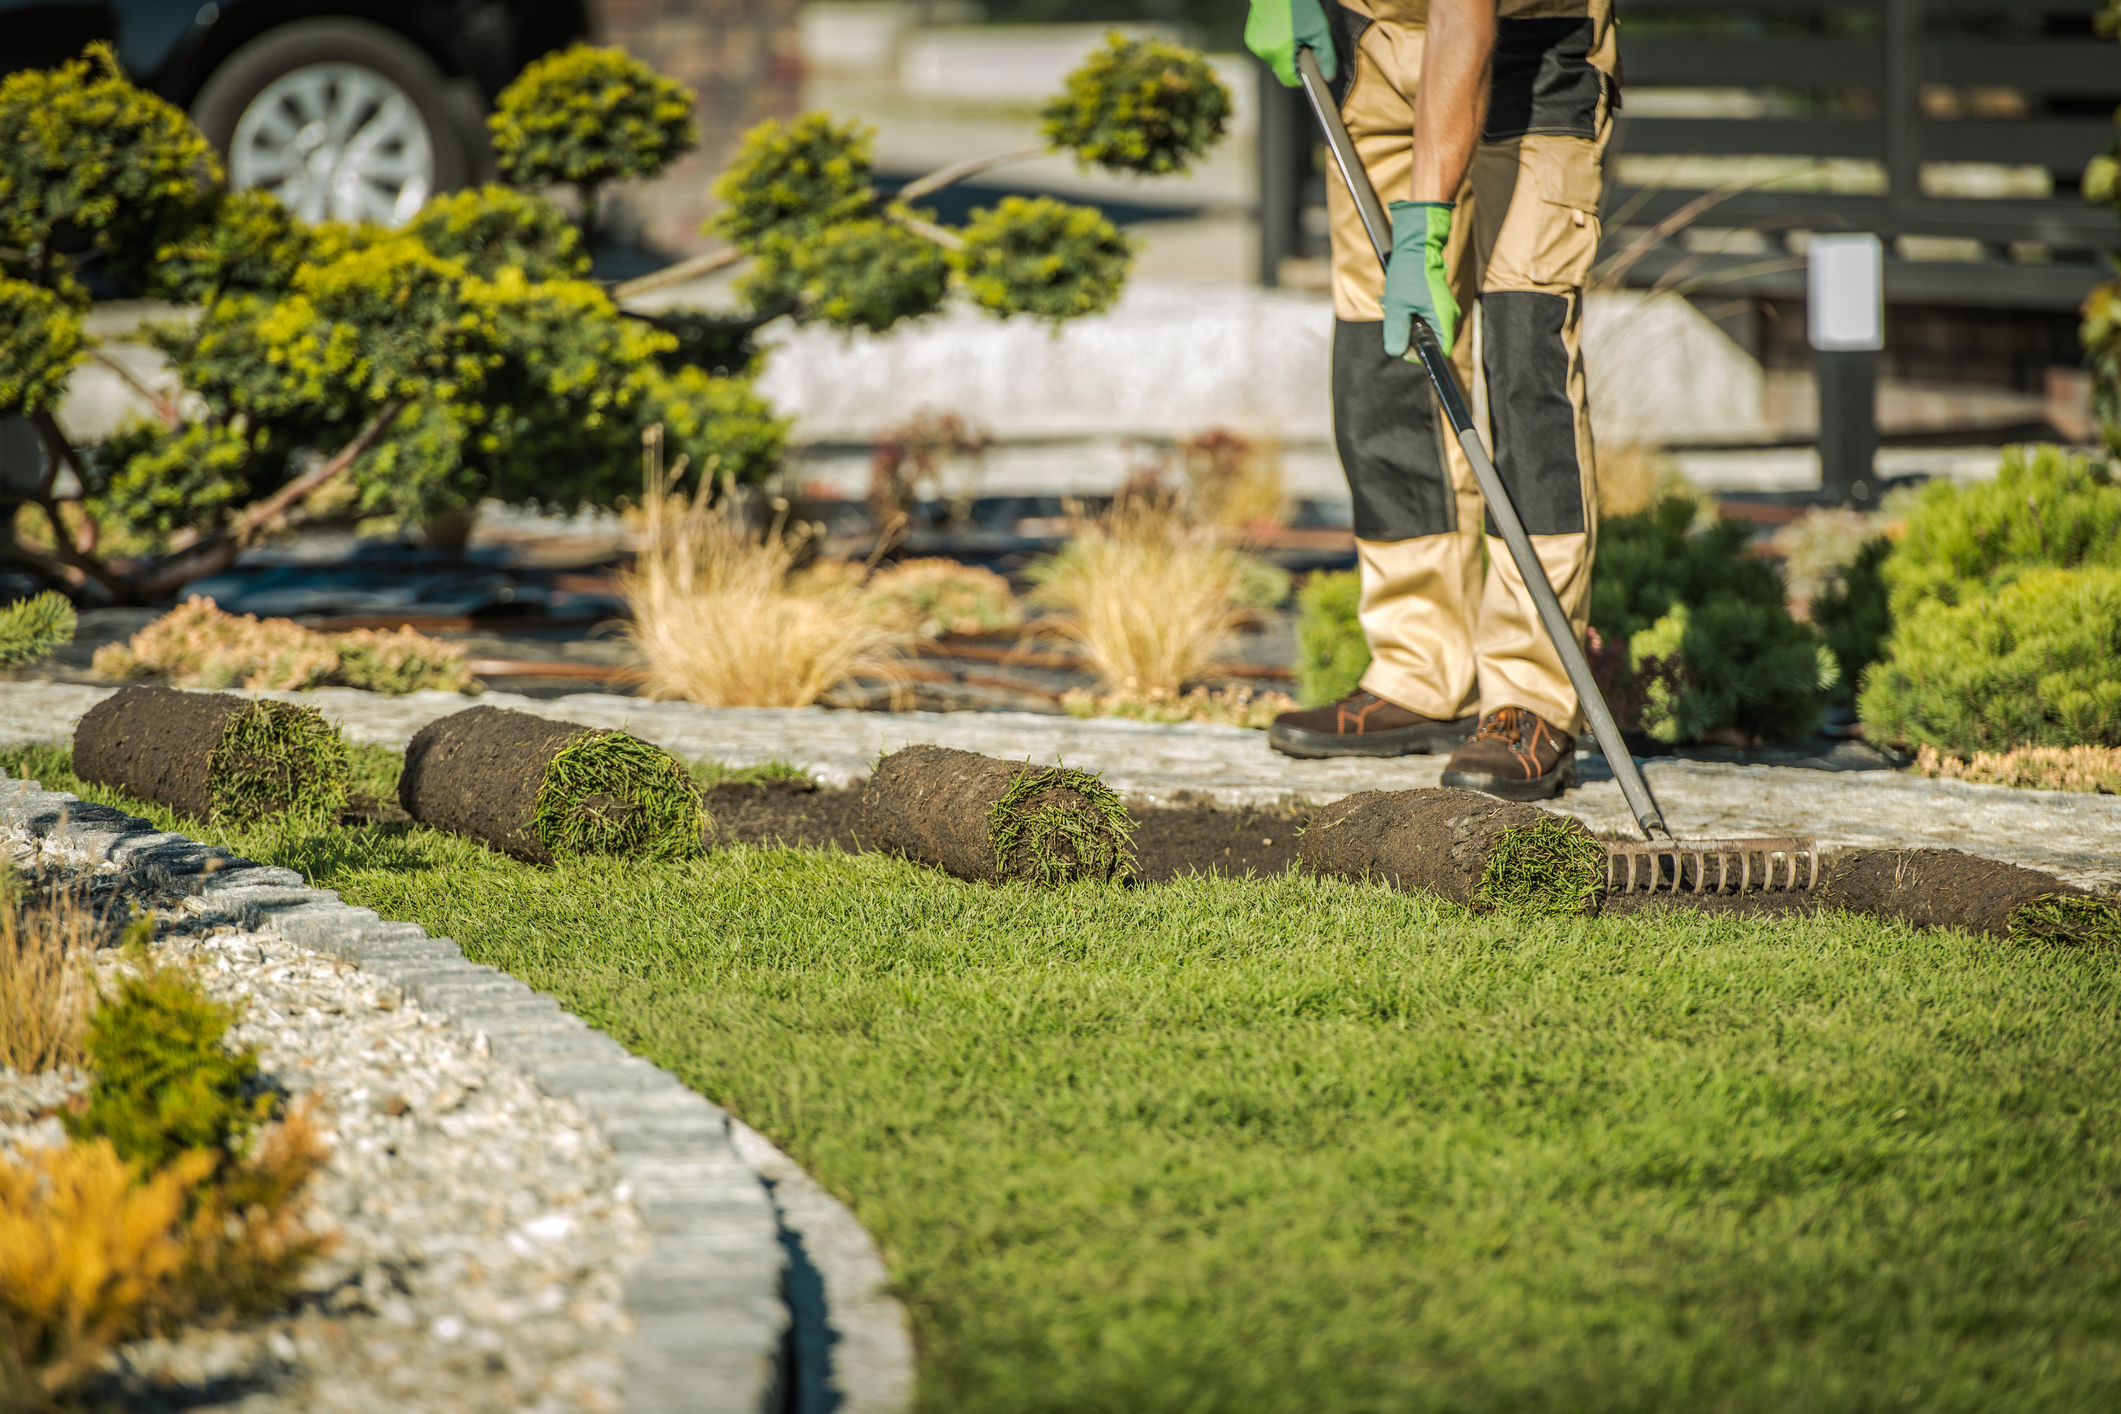 Landscape maintenance services like landscape design may be something business owners consider.